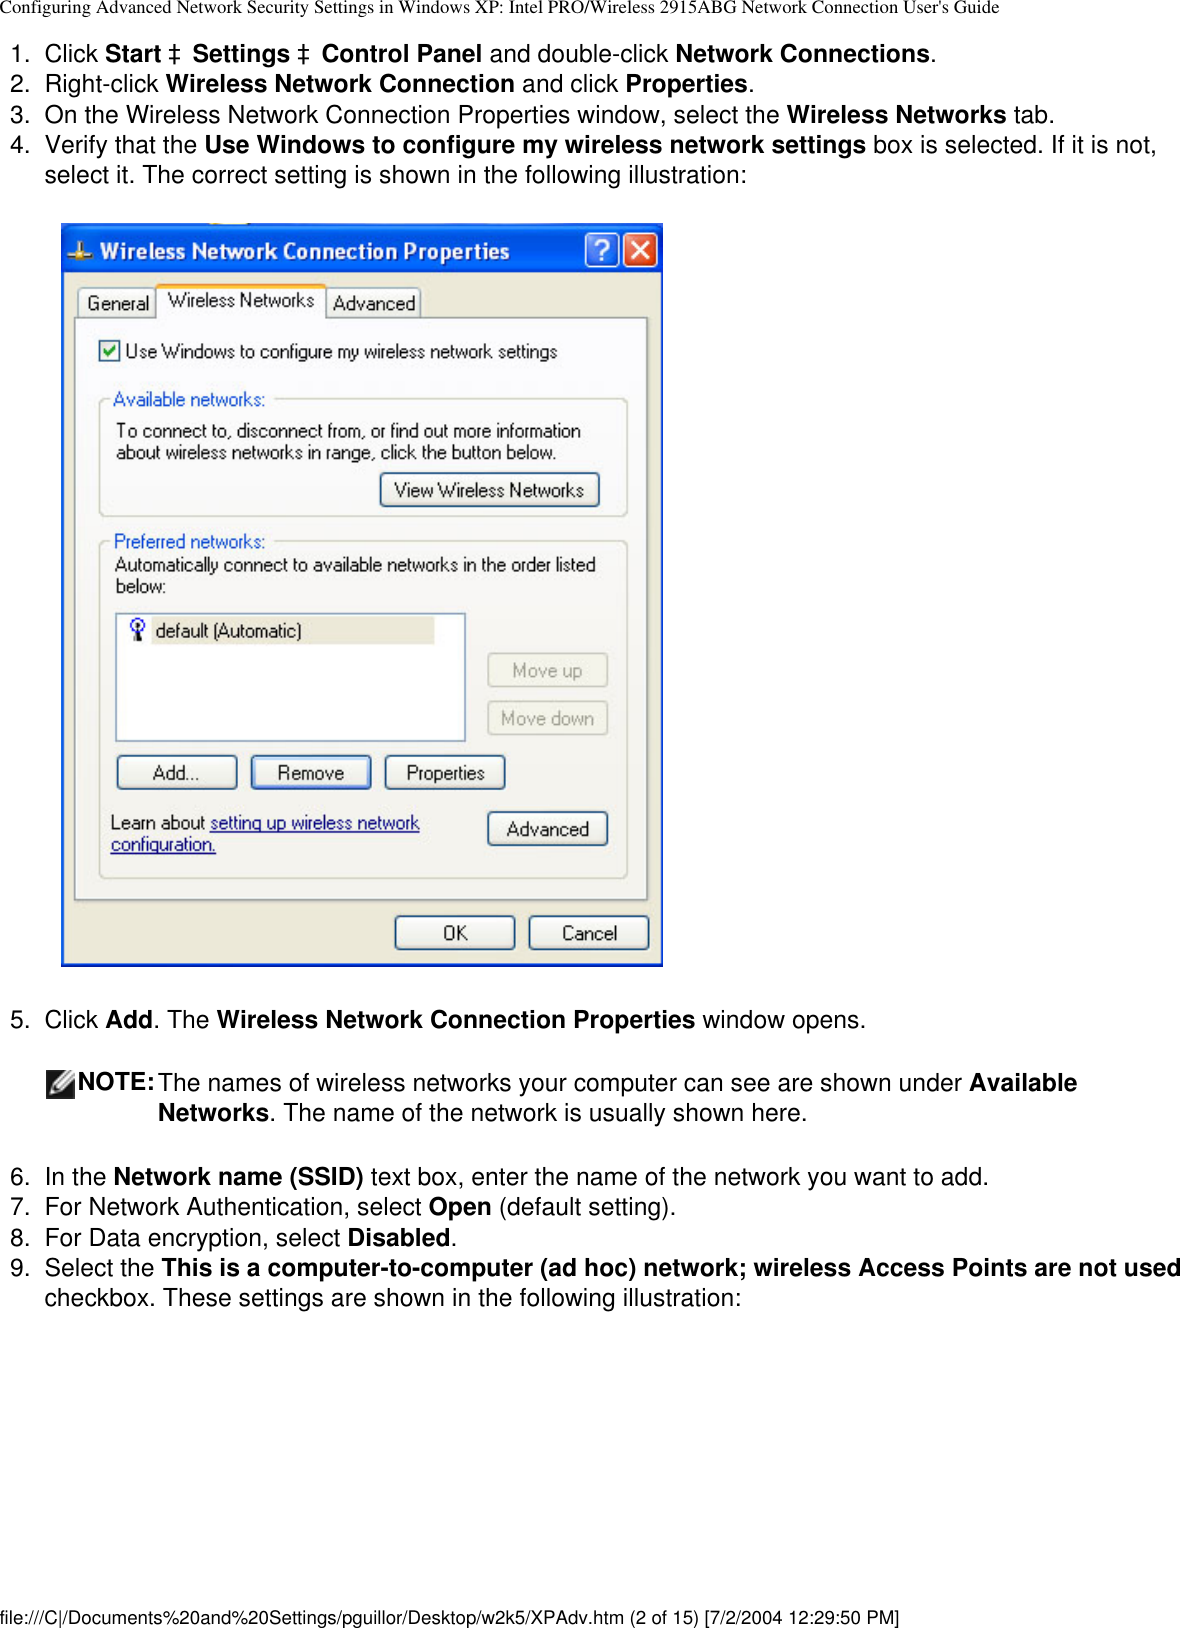 Configuring Advanced Network Security Settings in Windows XP: Intel PRO/Wireless 2915ABG Network Connection User&apos;s Guide1.  Click Start àSettings àControl Panel and double-click Network Connections.2.  Right-click Wireless Network Connection and click Properties. 3.  On the Wireless Network Connection Properties window, select the Wireless Networks tab.4.  Verify that the Use Windows to configure my wireless network settings box is selected. If it is not, select it. The correct setting is shown in the following illustration:            5.  Click Add. The Wireless Network Connection Properties window opens.NOTE:The names of wireless networks your computer can see are shown under Available Networks. The name of the network is usually shown here.6.  In the Network name (SSID) text box, enter the name of the network you want to add.7.  For Network Authentication, select Open (default setting).8.  For Data encryption, select Disabled.9.  Select the This is a computer-to-computer (ad hoc) network; wireless Access Points are not used checkbox. These settings are shown in the following illustration:file:///C|/Documents%20and%20Settings/pguillor/Desktop/w2k5/XPAdv.htm (2 of 15) [7/2/2004 12:29:50 PM]